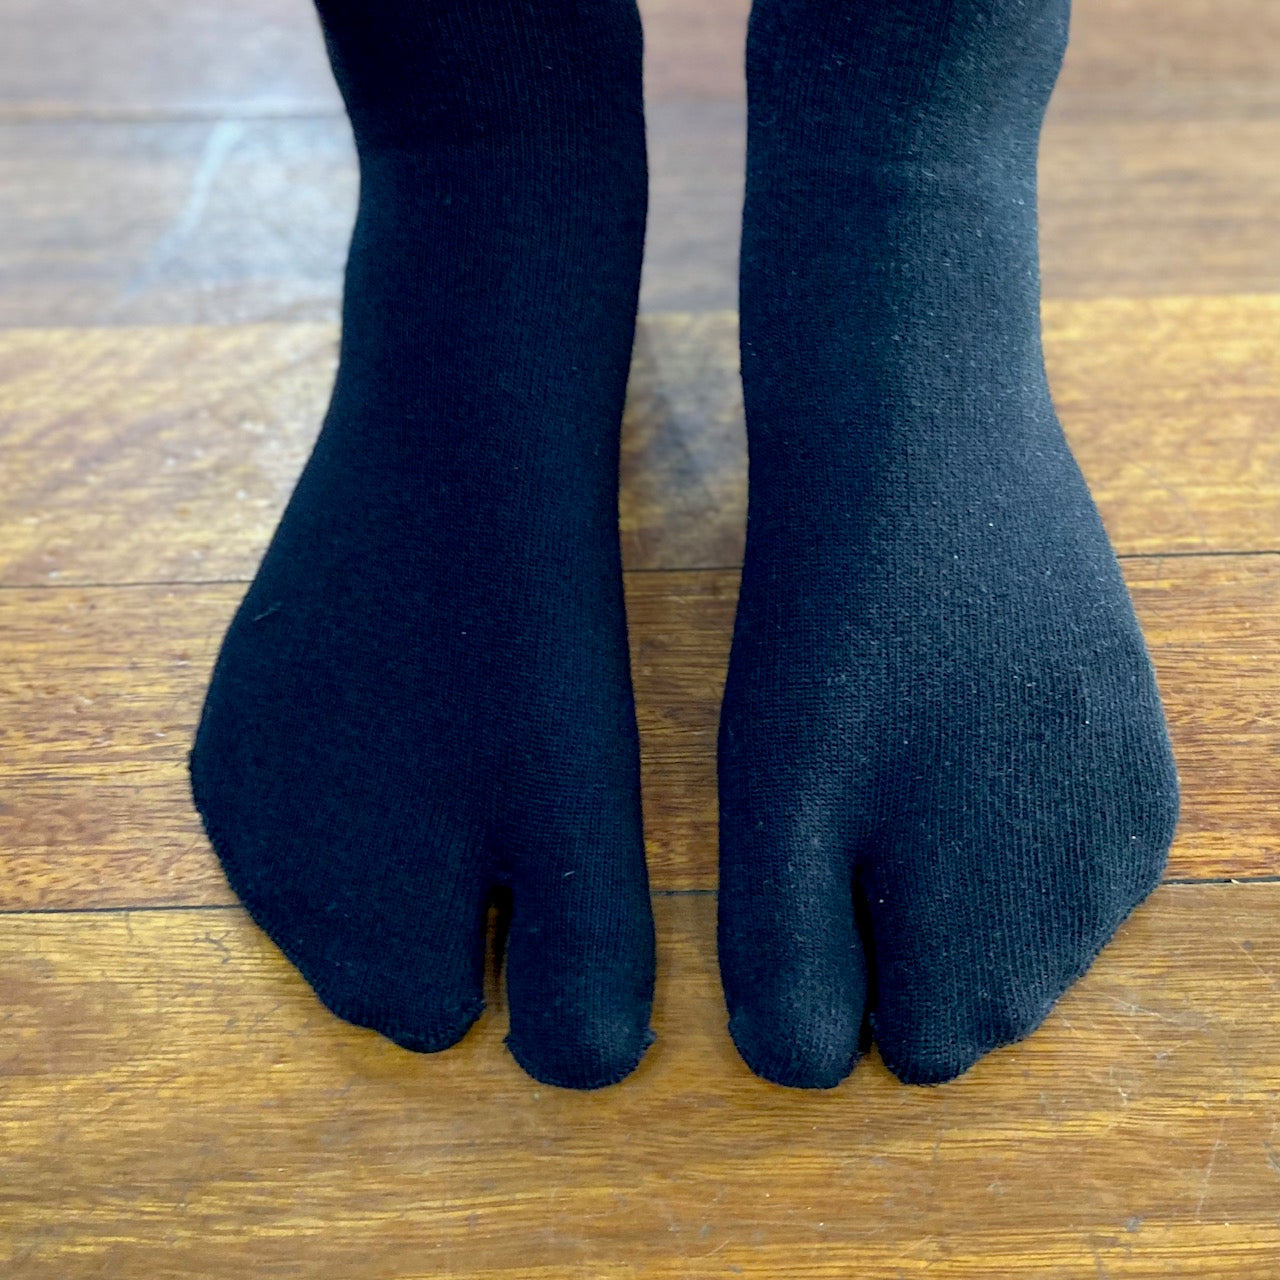 Tabi Socks that fit above the ankle and below the calf